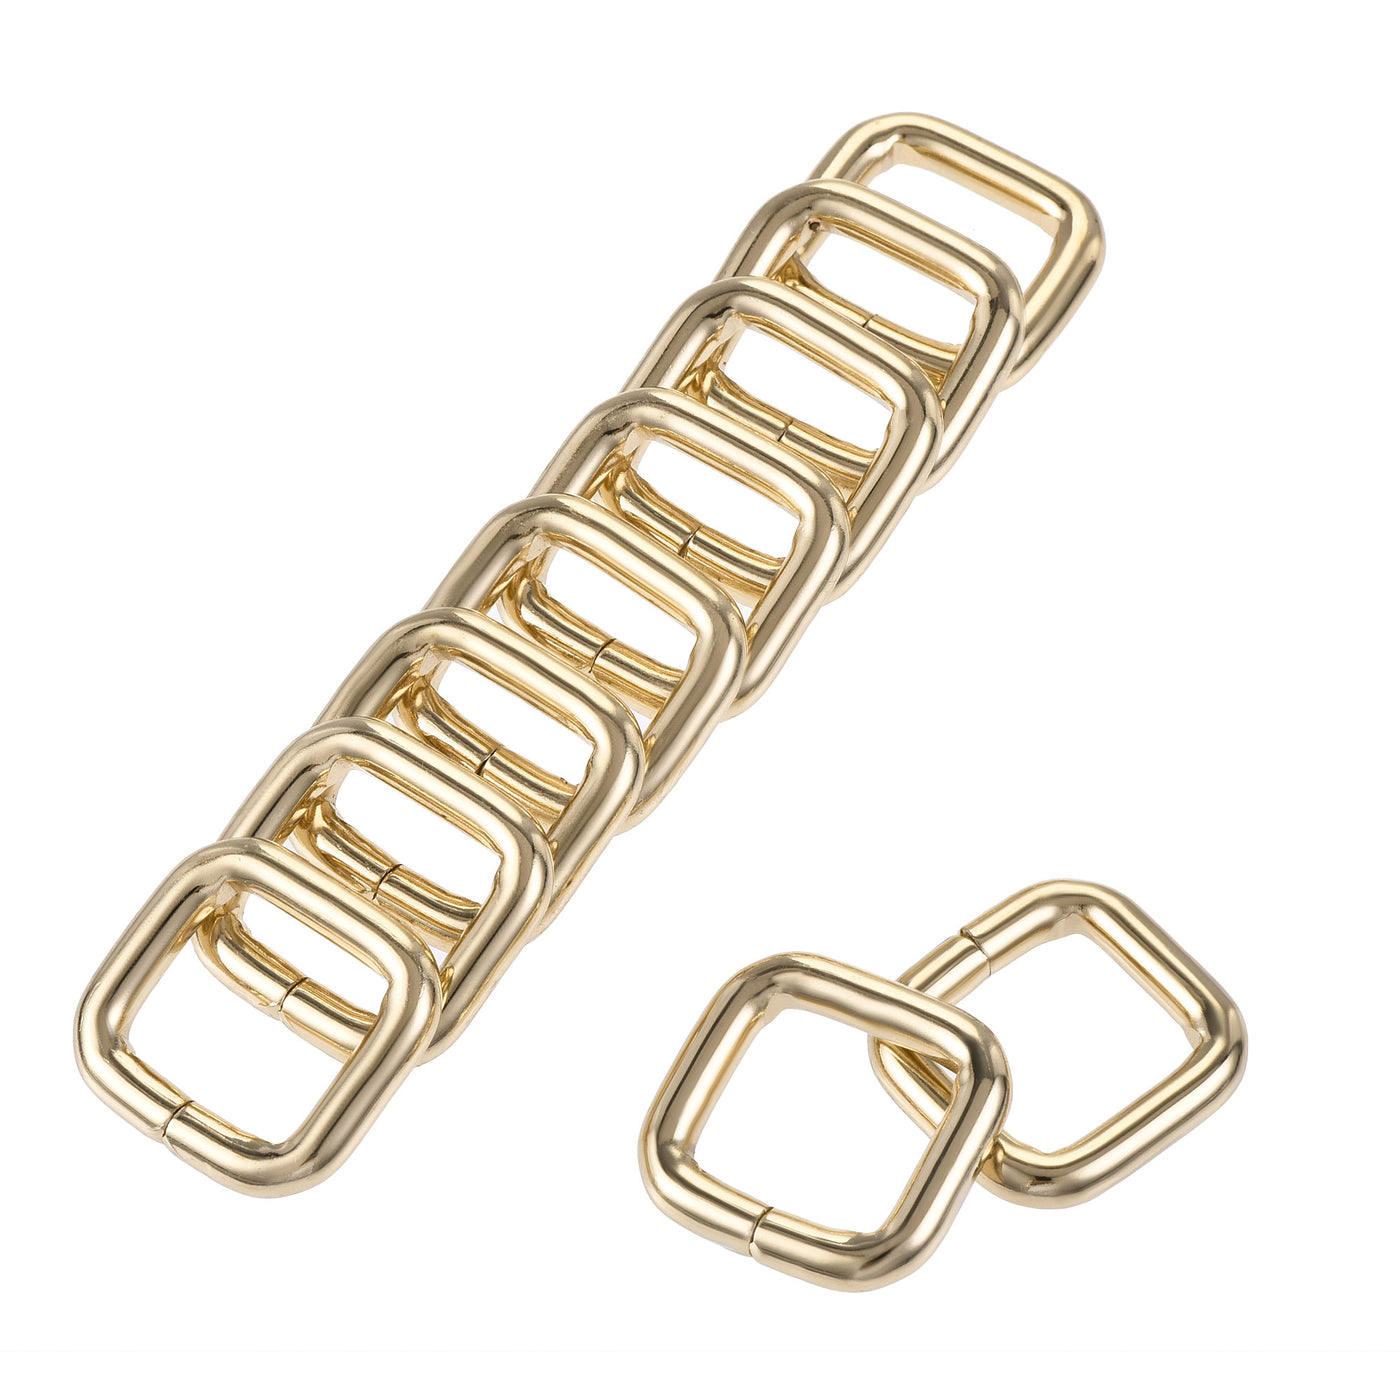 uxcell Uxcell Metal Rectangle Ring Buckles 16x15mm for Bags Belts DIY Gold Tone 10pcs